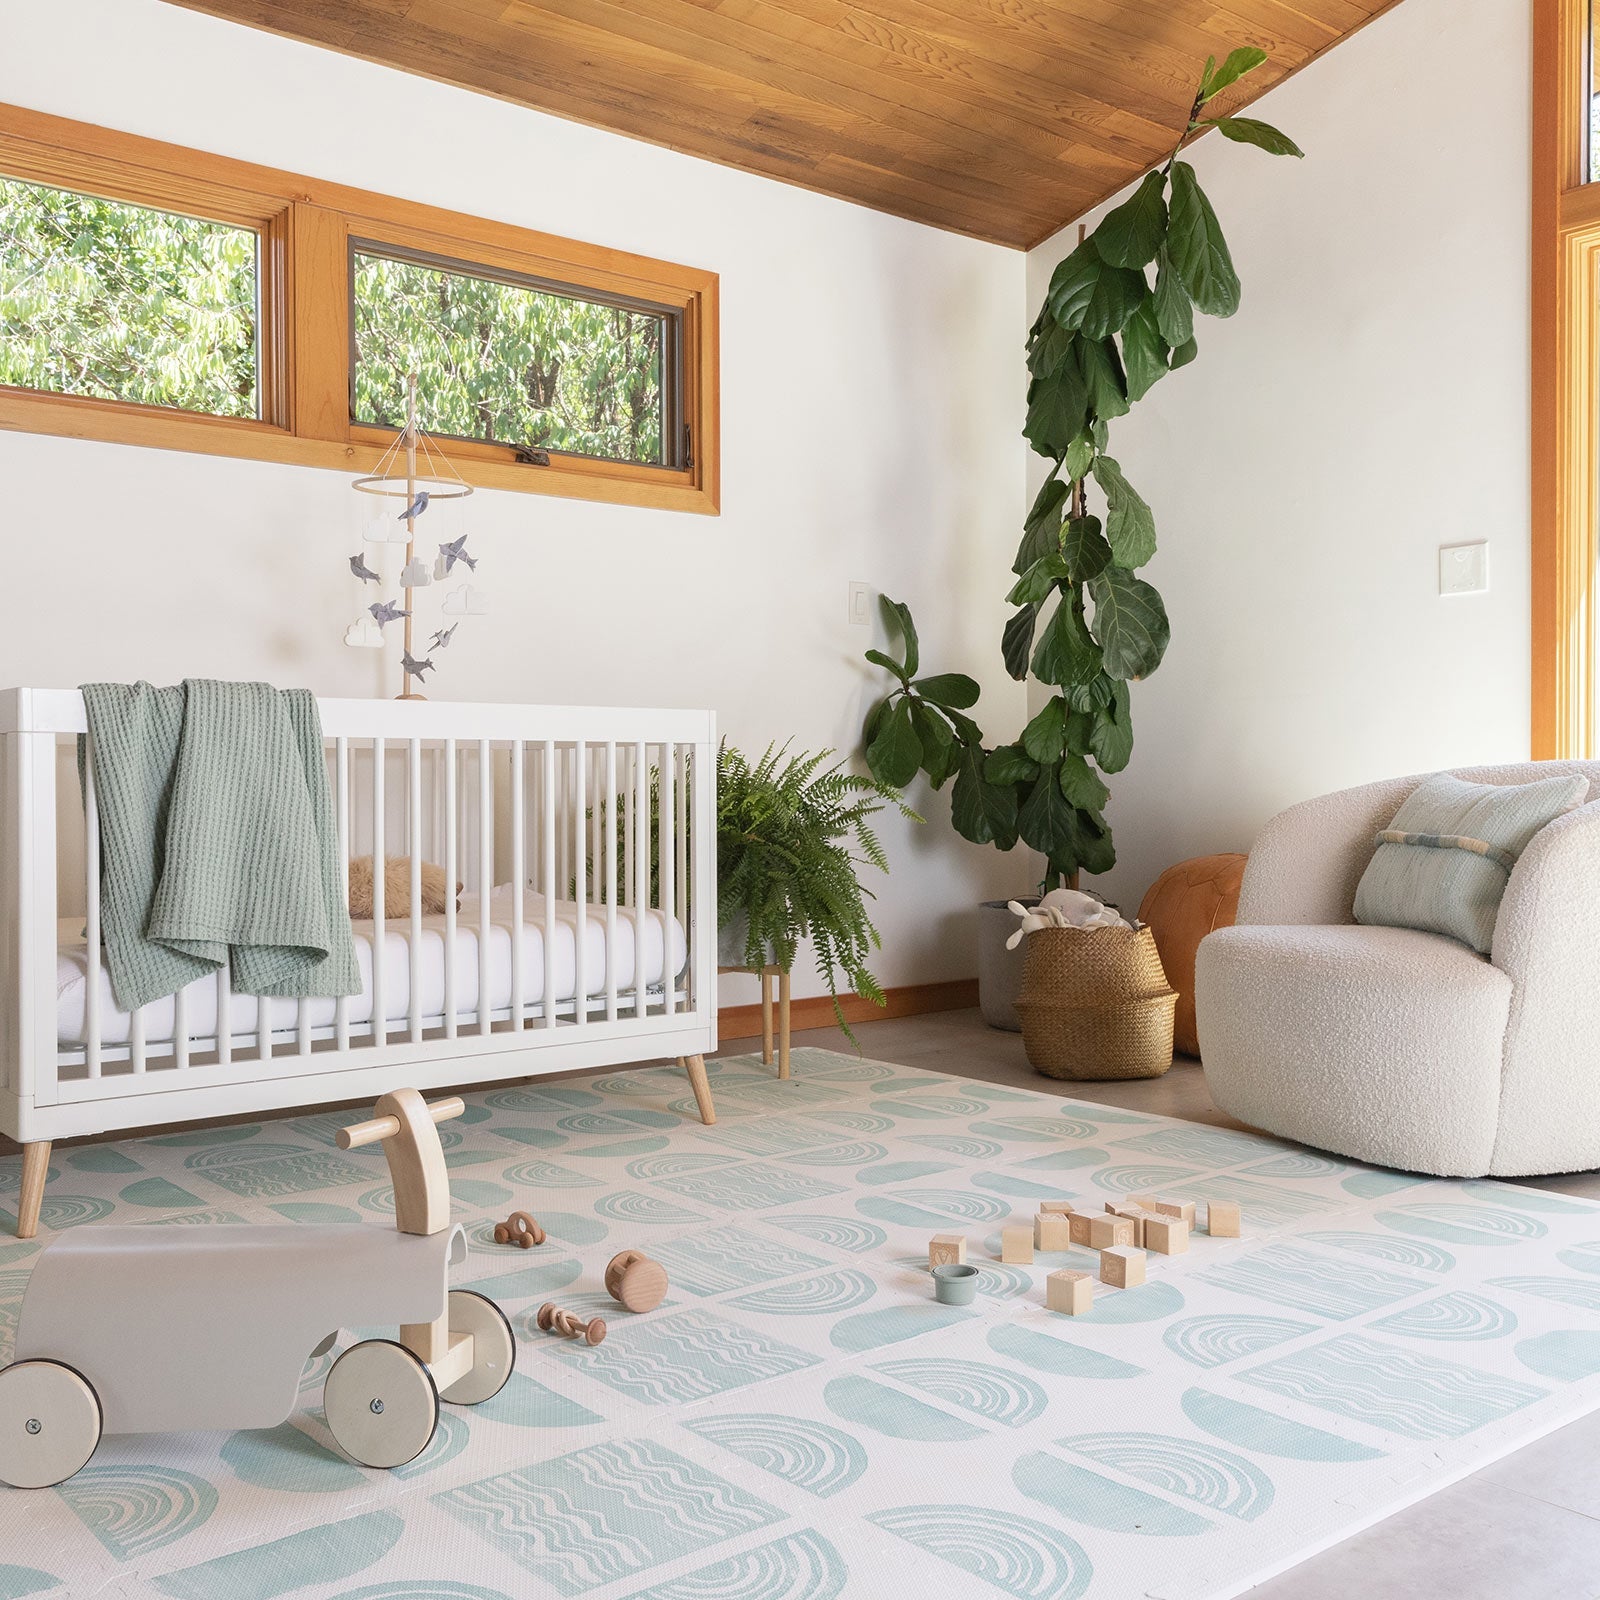 Ada modern minimalist baby play mat in Celadon, pale aqua blue and off white. Shown in nursery with crib, toys, chair, and plants.